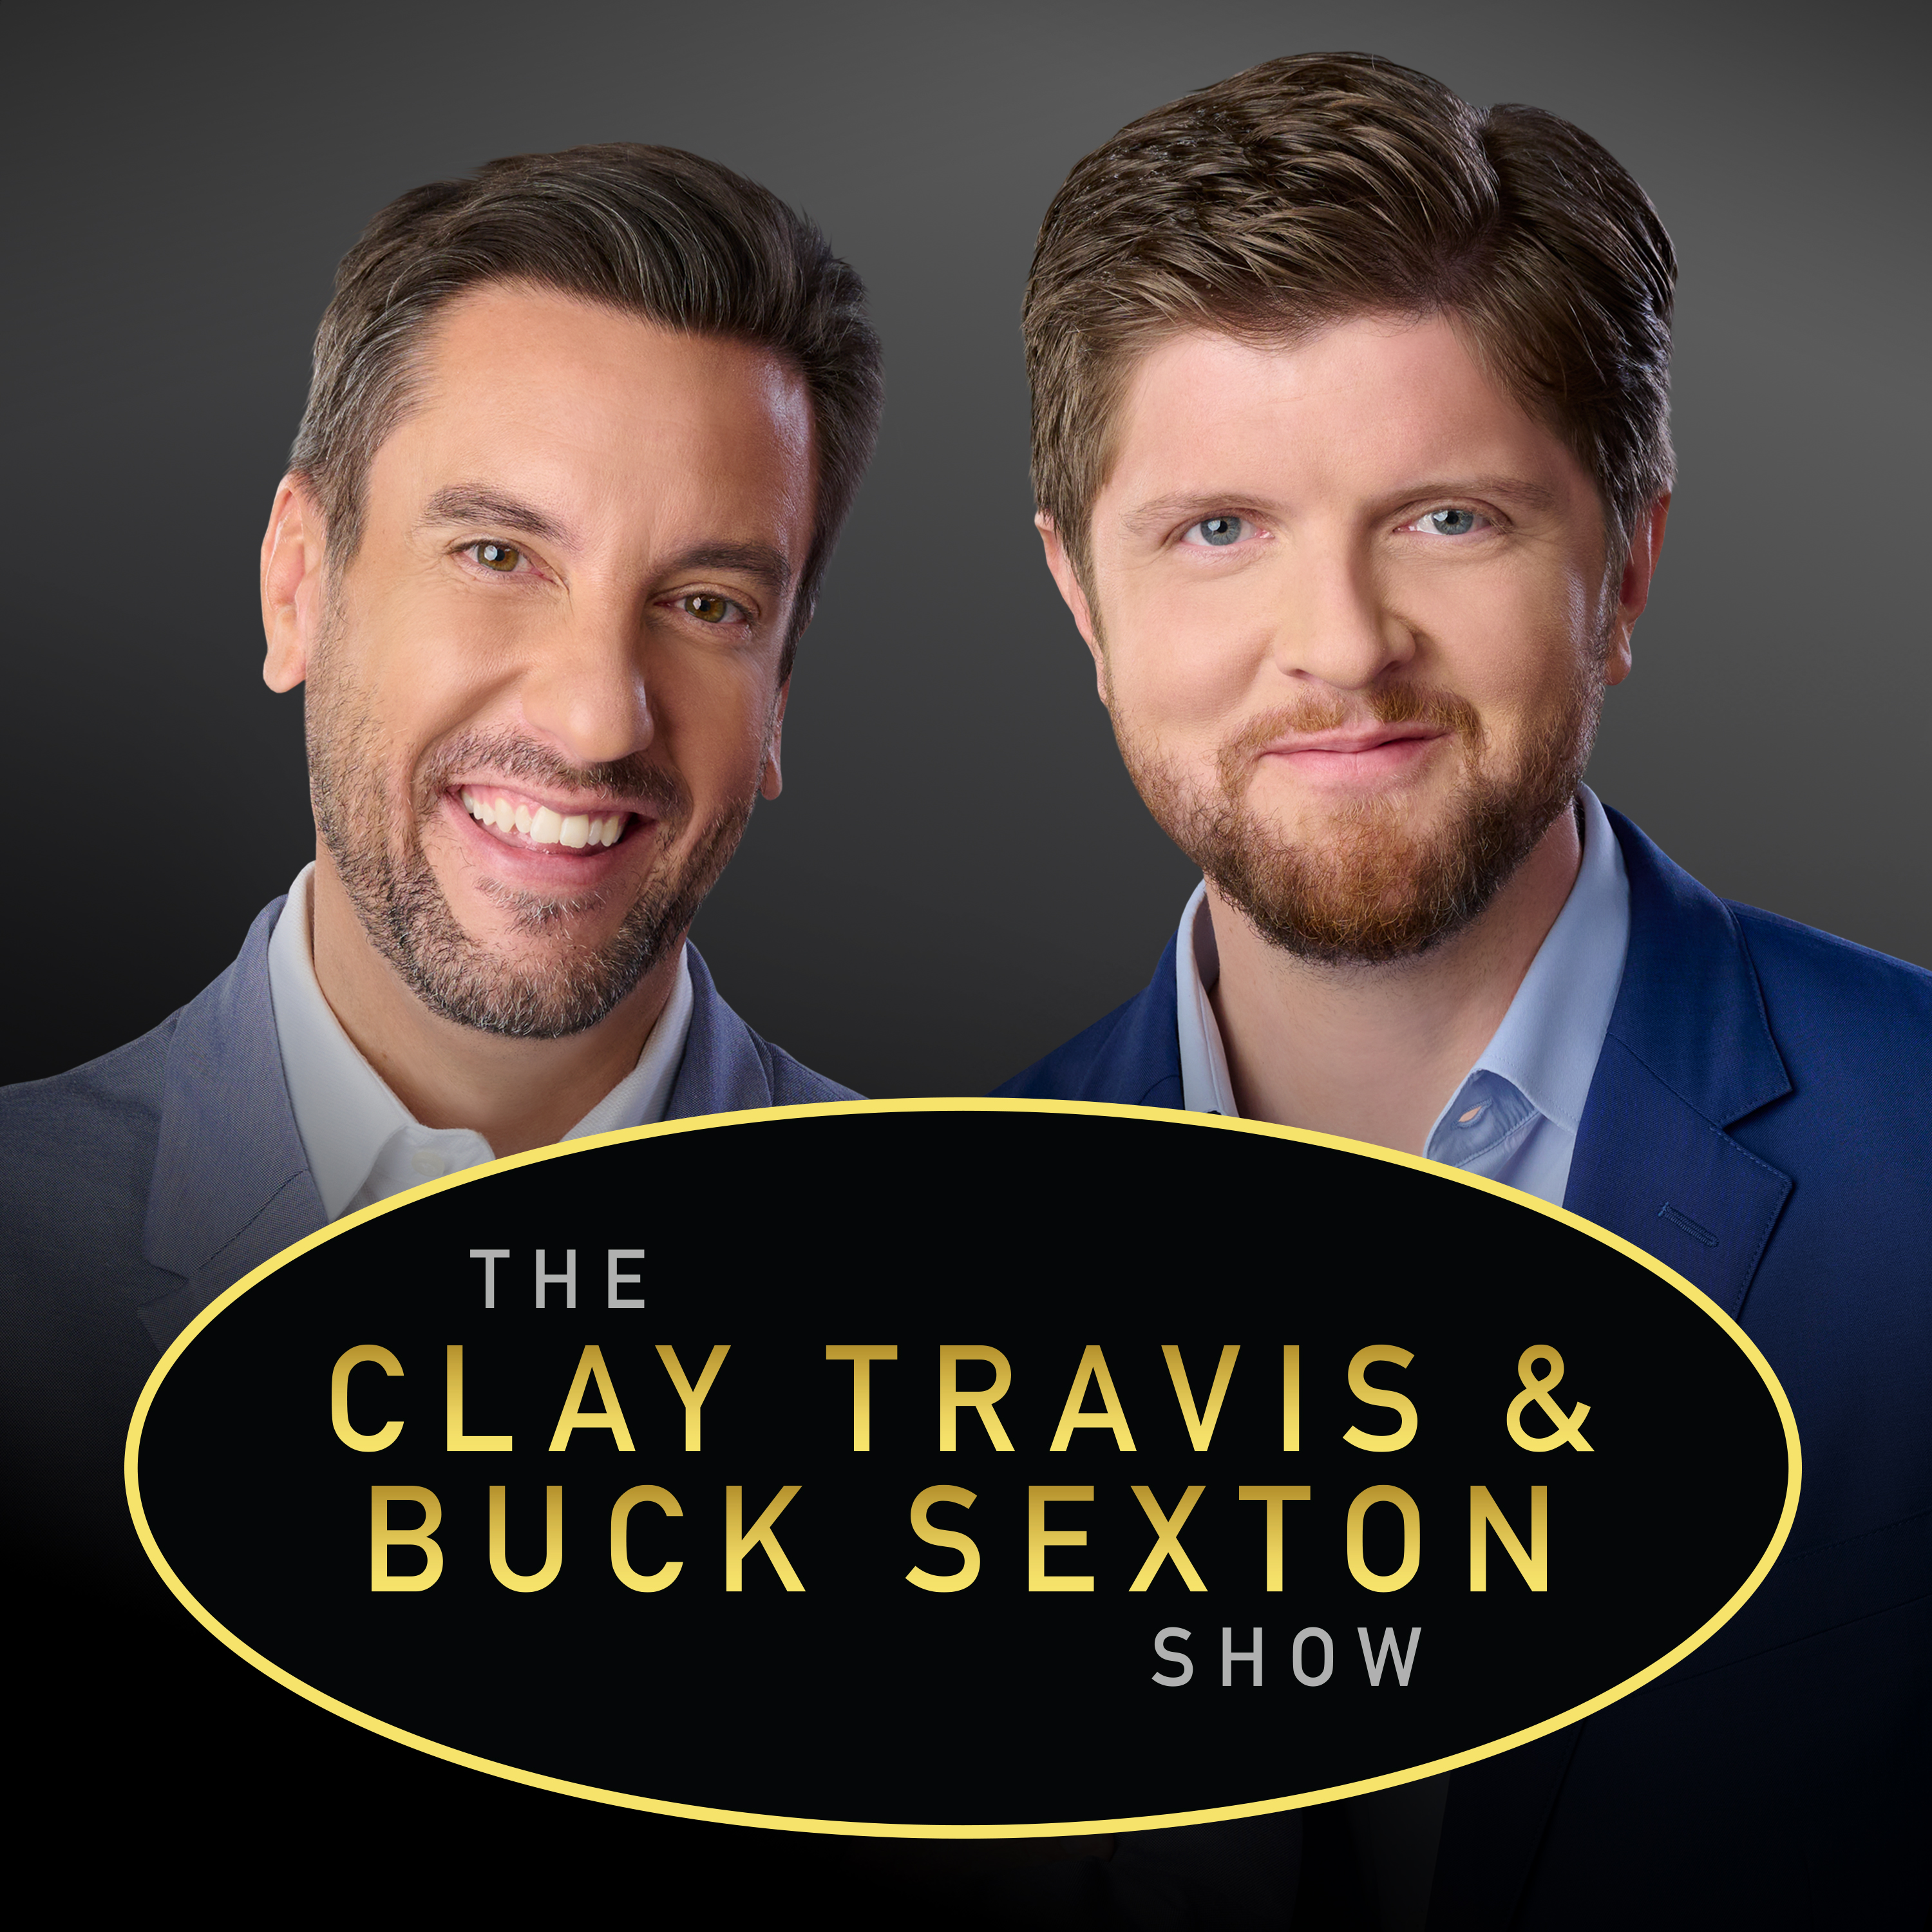 Clay Travis and Buck Sexton Show H1 – May 16 2022